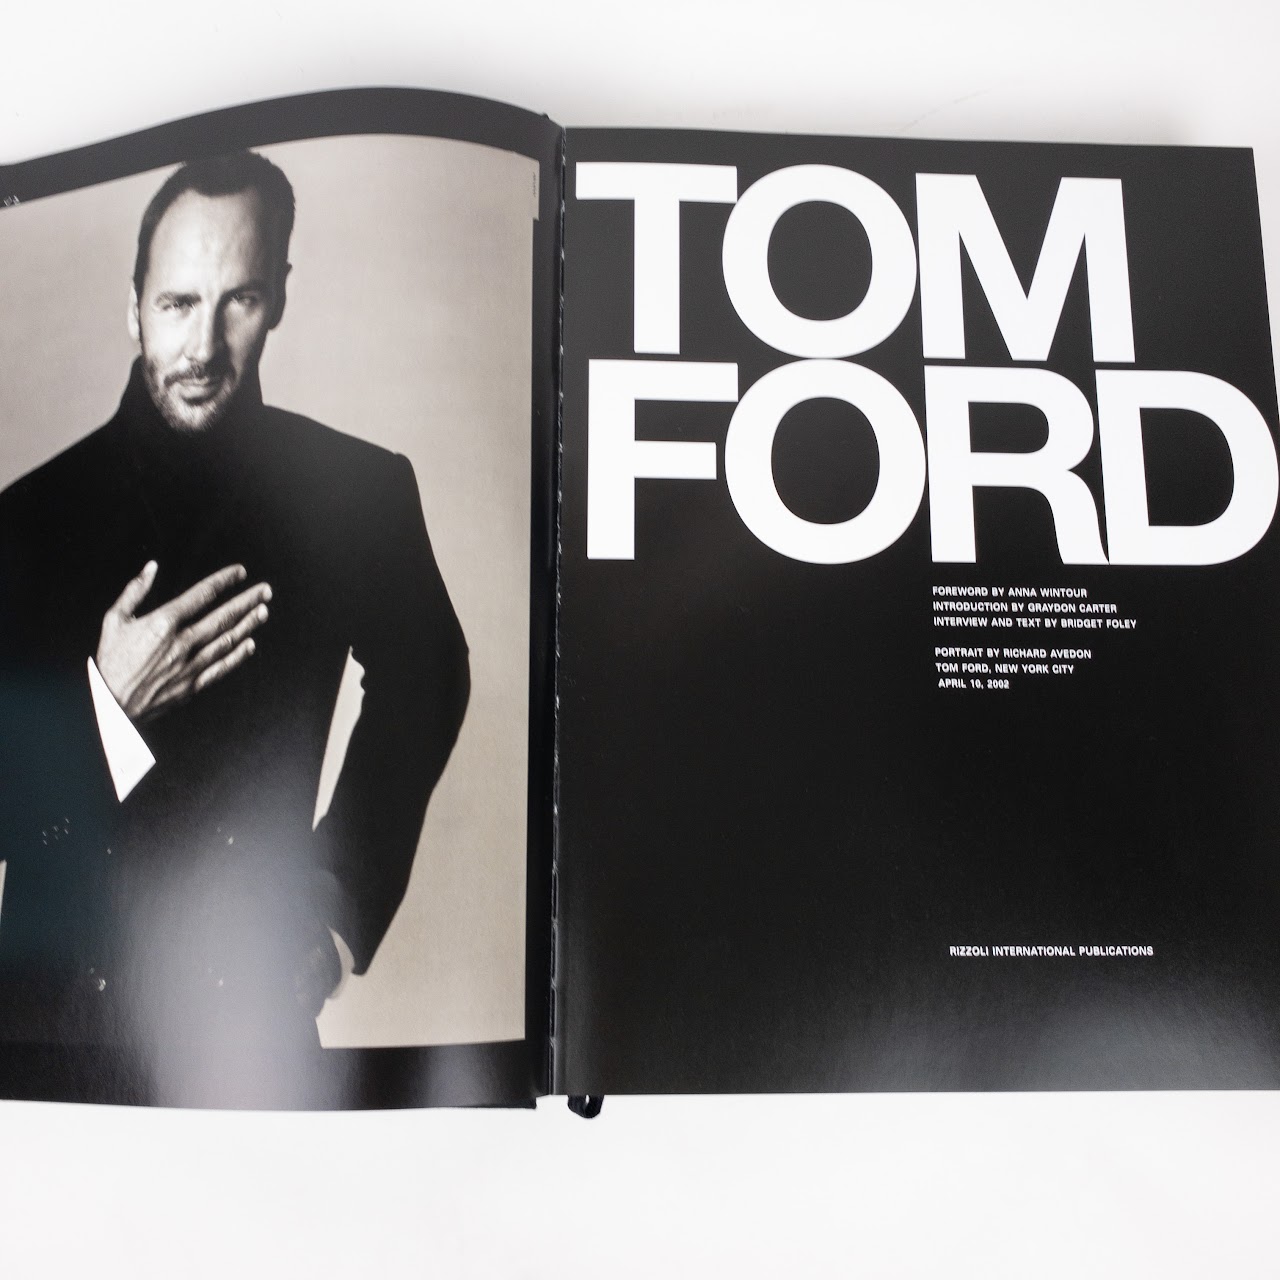 'Tom Ford' Book